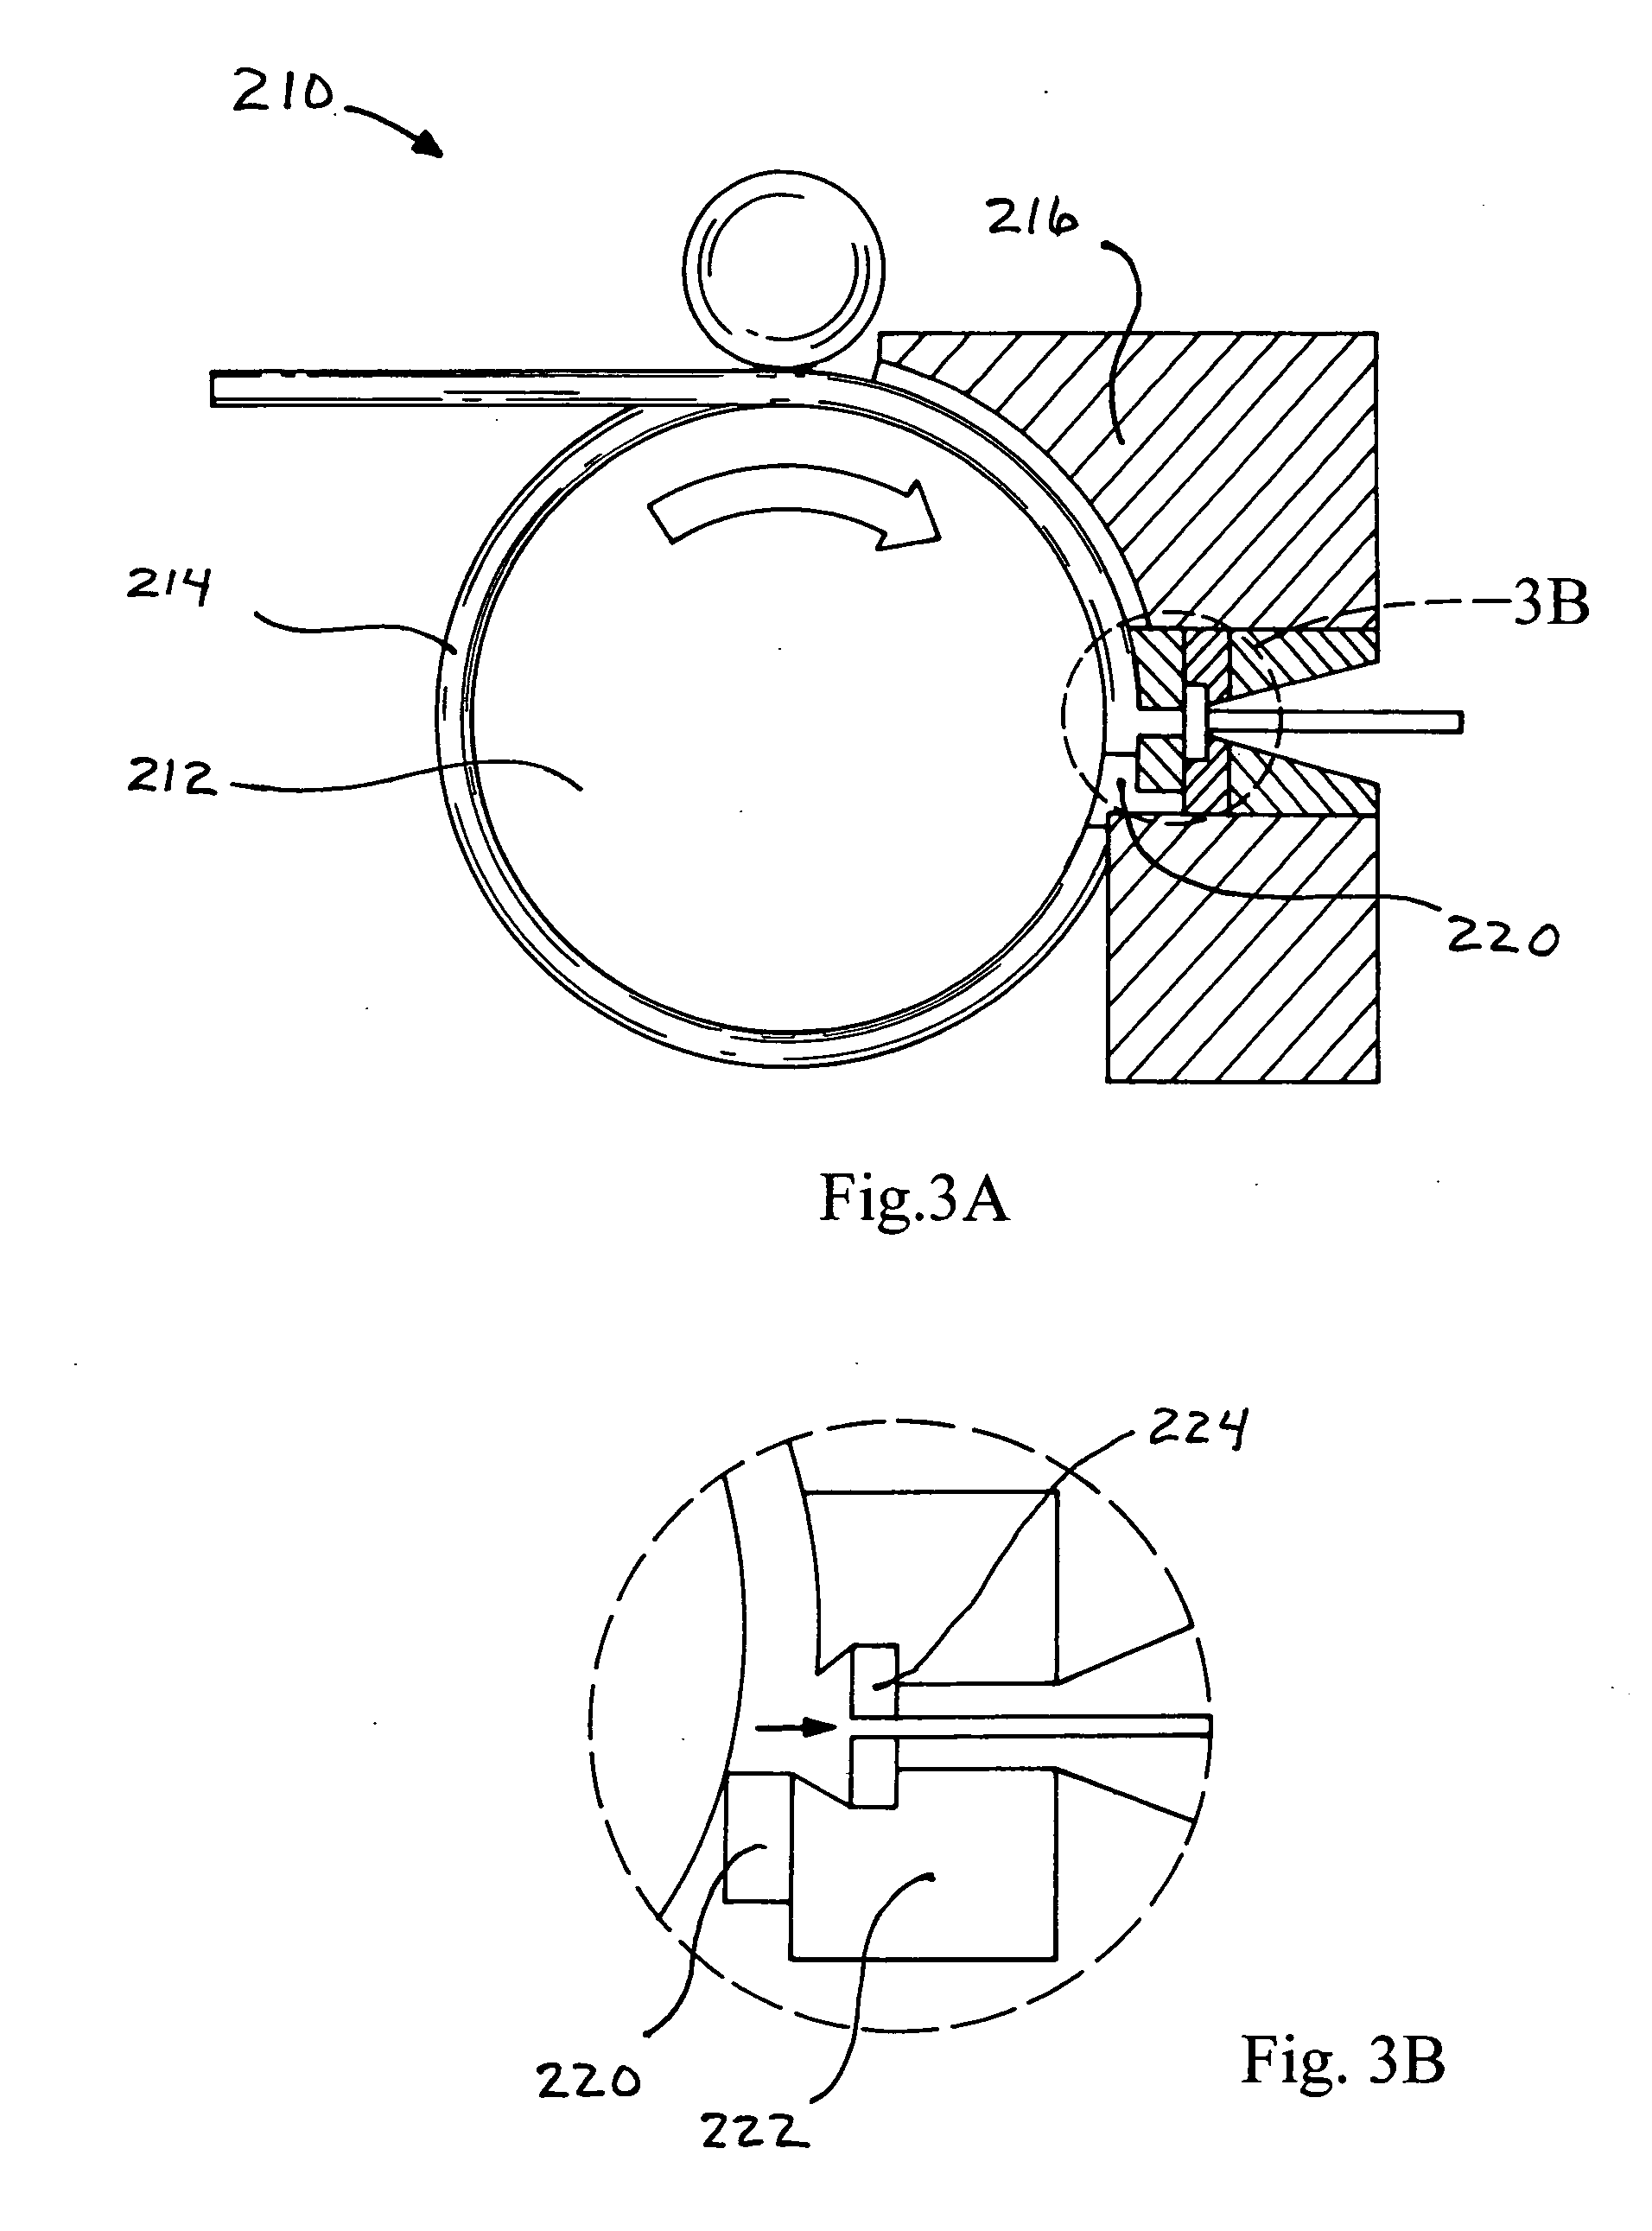 Aluminum-based alloy composition and method of making extruded components from aluminum-based alloy compositions